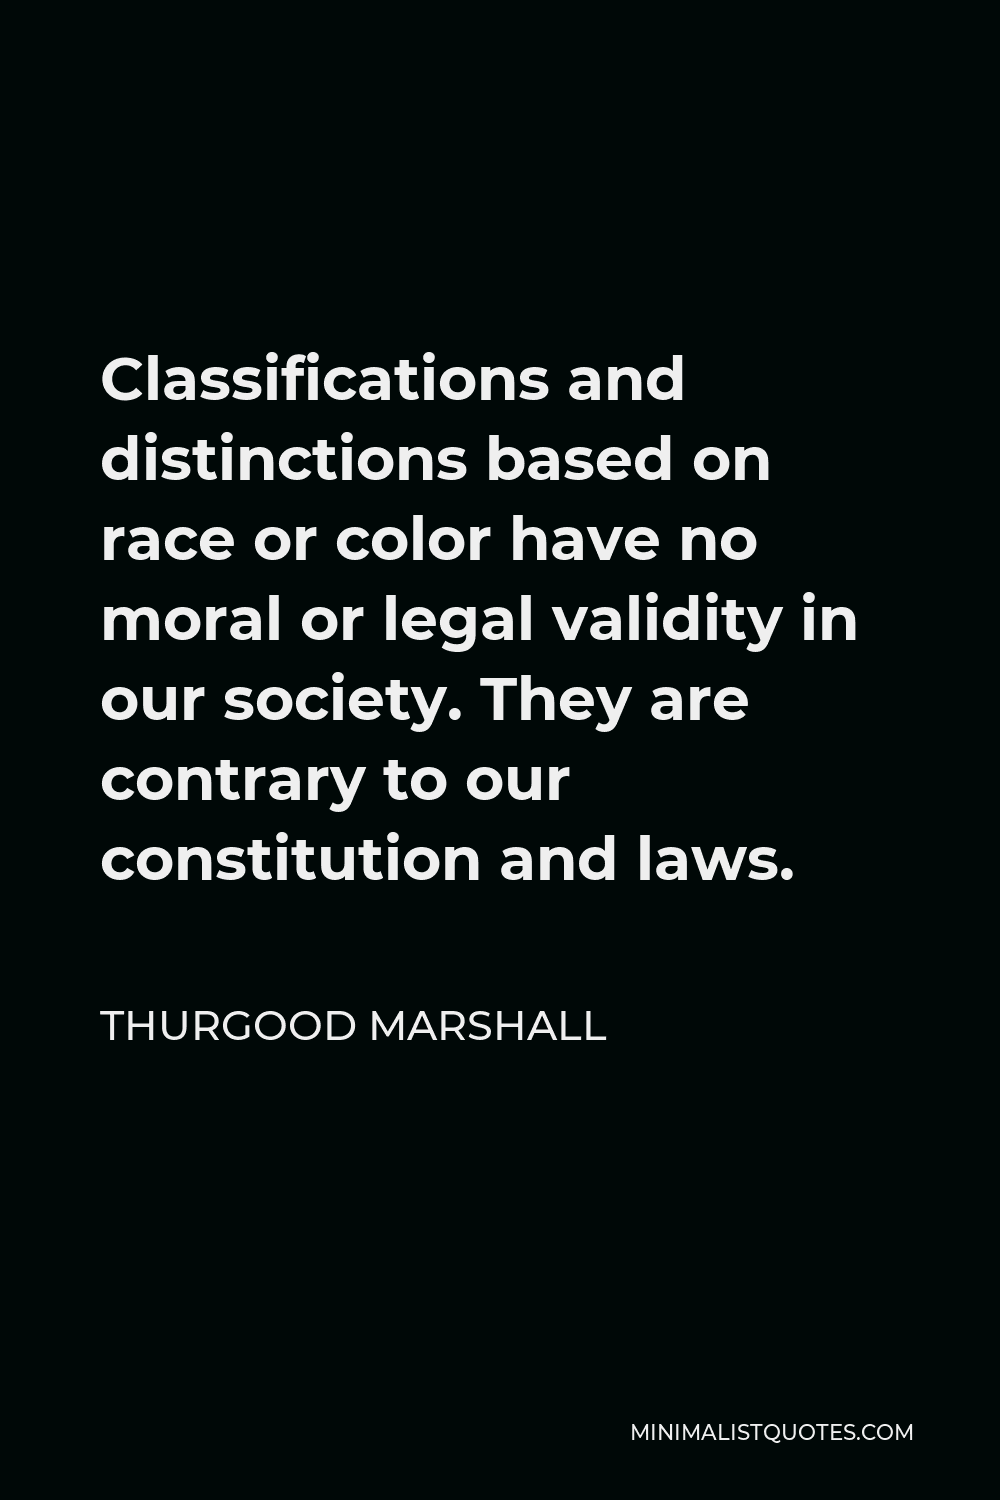 Thurgood Marshall Quote - Classifications and distinctions based on race or color have no moral or legal validity in our society. They are contrary to our constitution and laws.